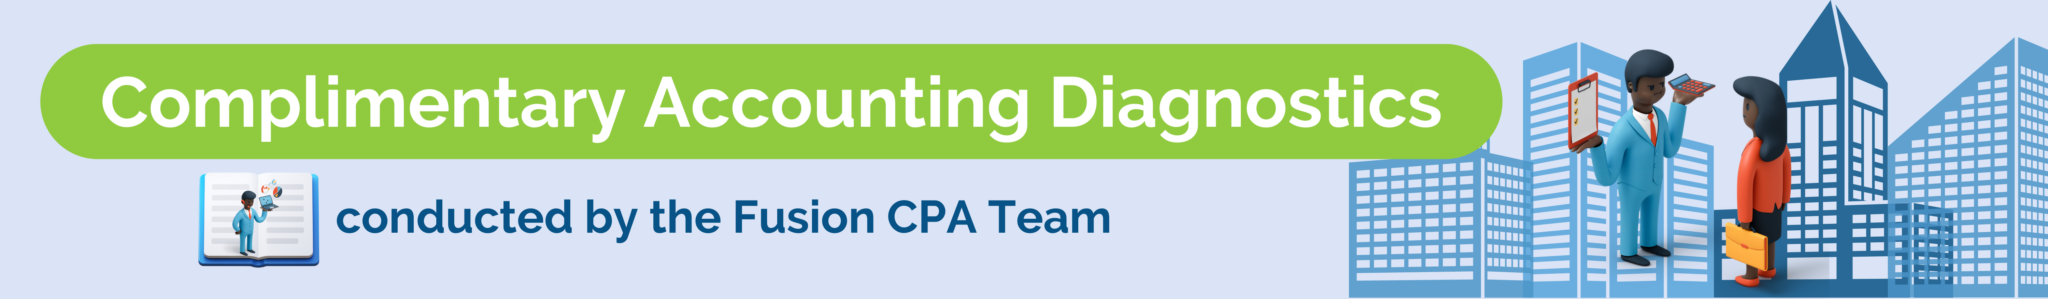 Complimentary Accounting Diagnostics Banner